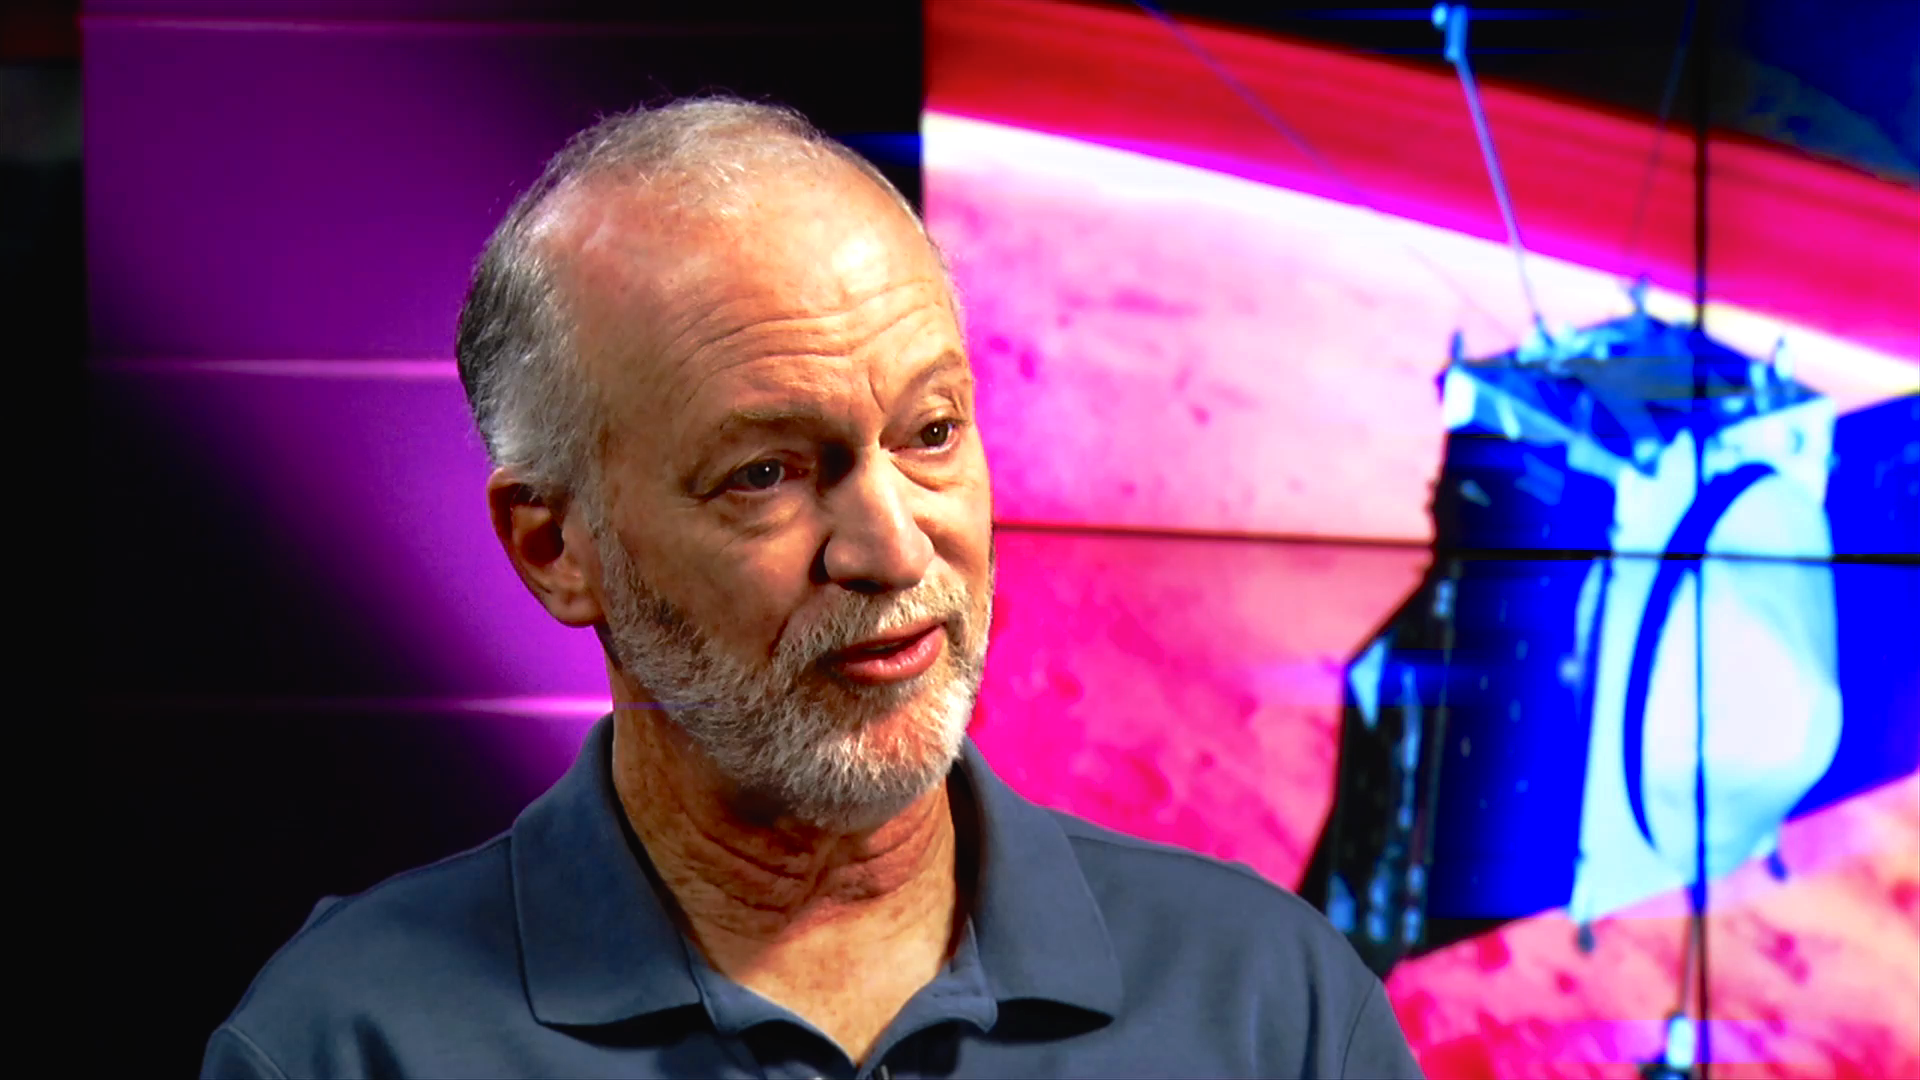 Principal Investigator Bruce Jakosky talks about MAVEN’s science observations at Mars.Watch this video on the NASAexplorer YouTube channel.For complete transcript, click here.